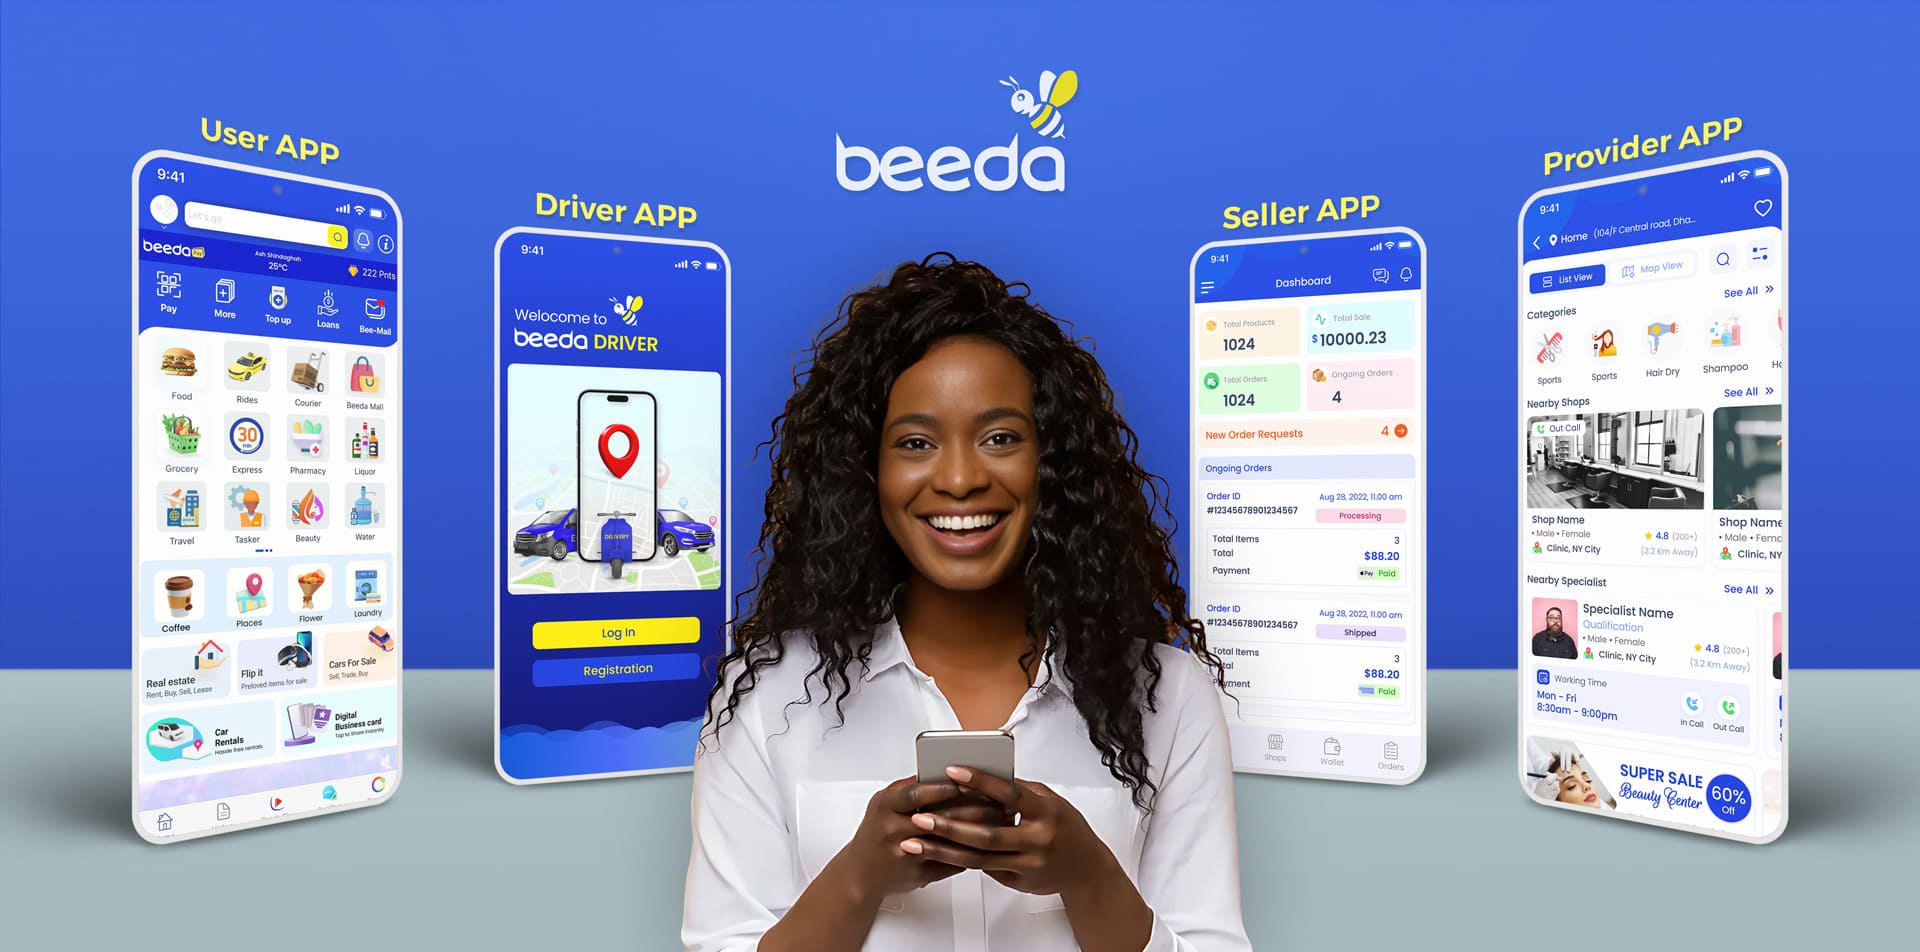 Beeda: A Marvelous Solution to the Hassles of Daily Life